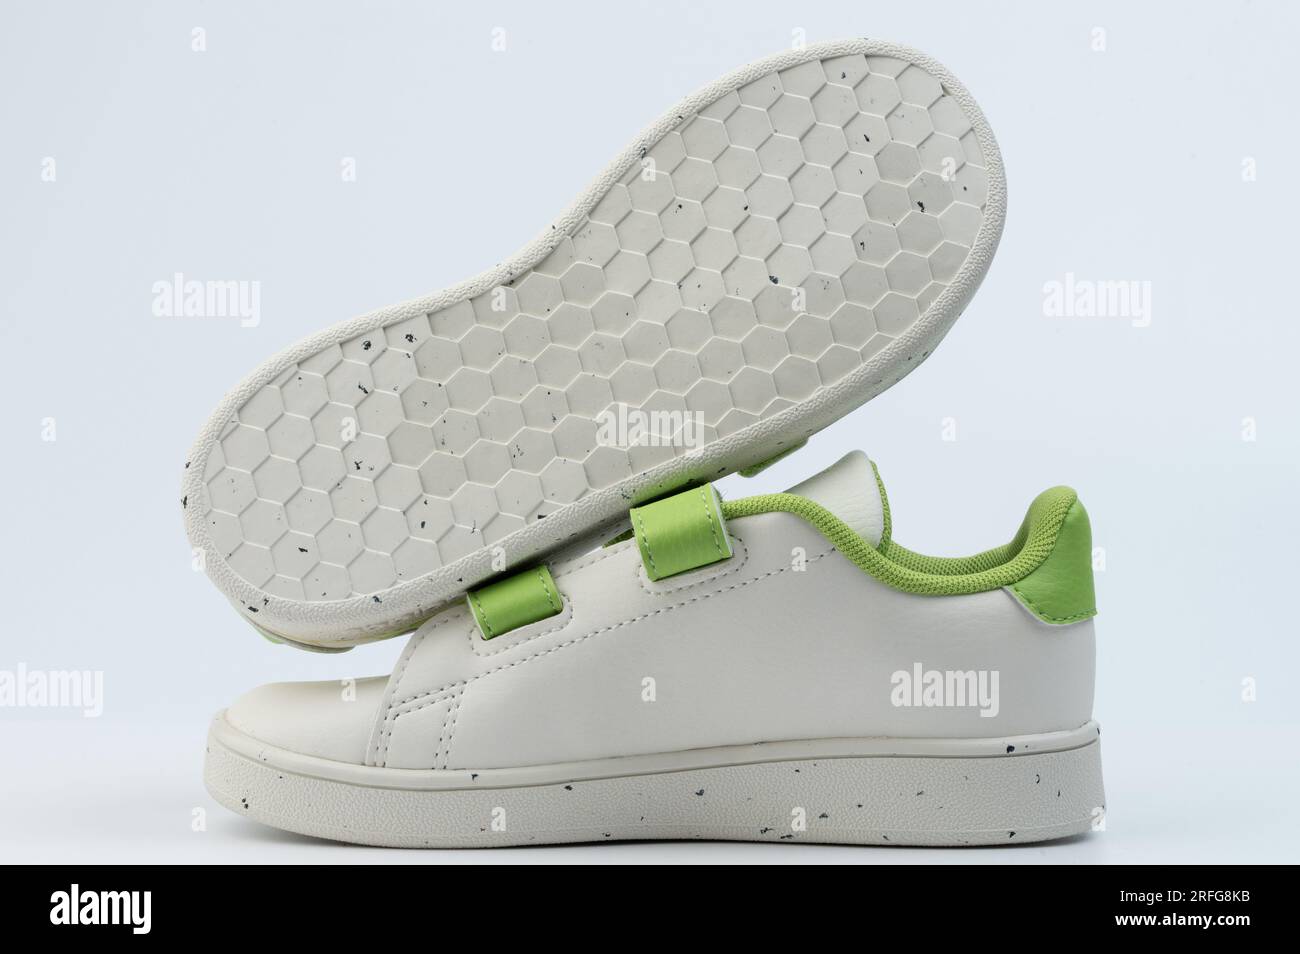 New child pair sneakers shoes side view with green velcro isolated Stock Photo